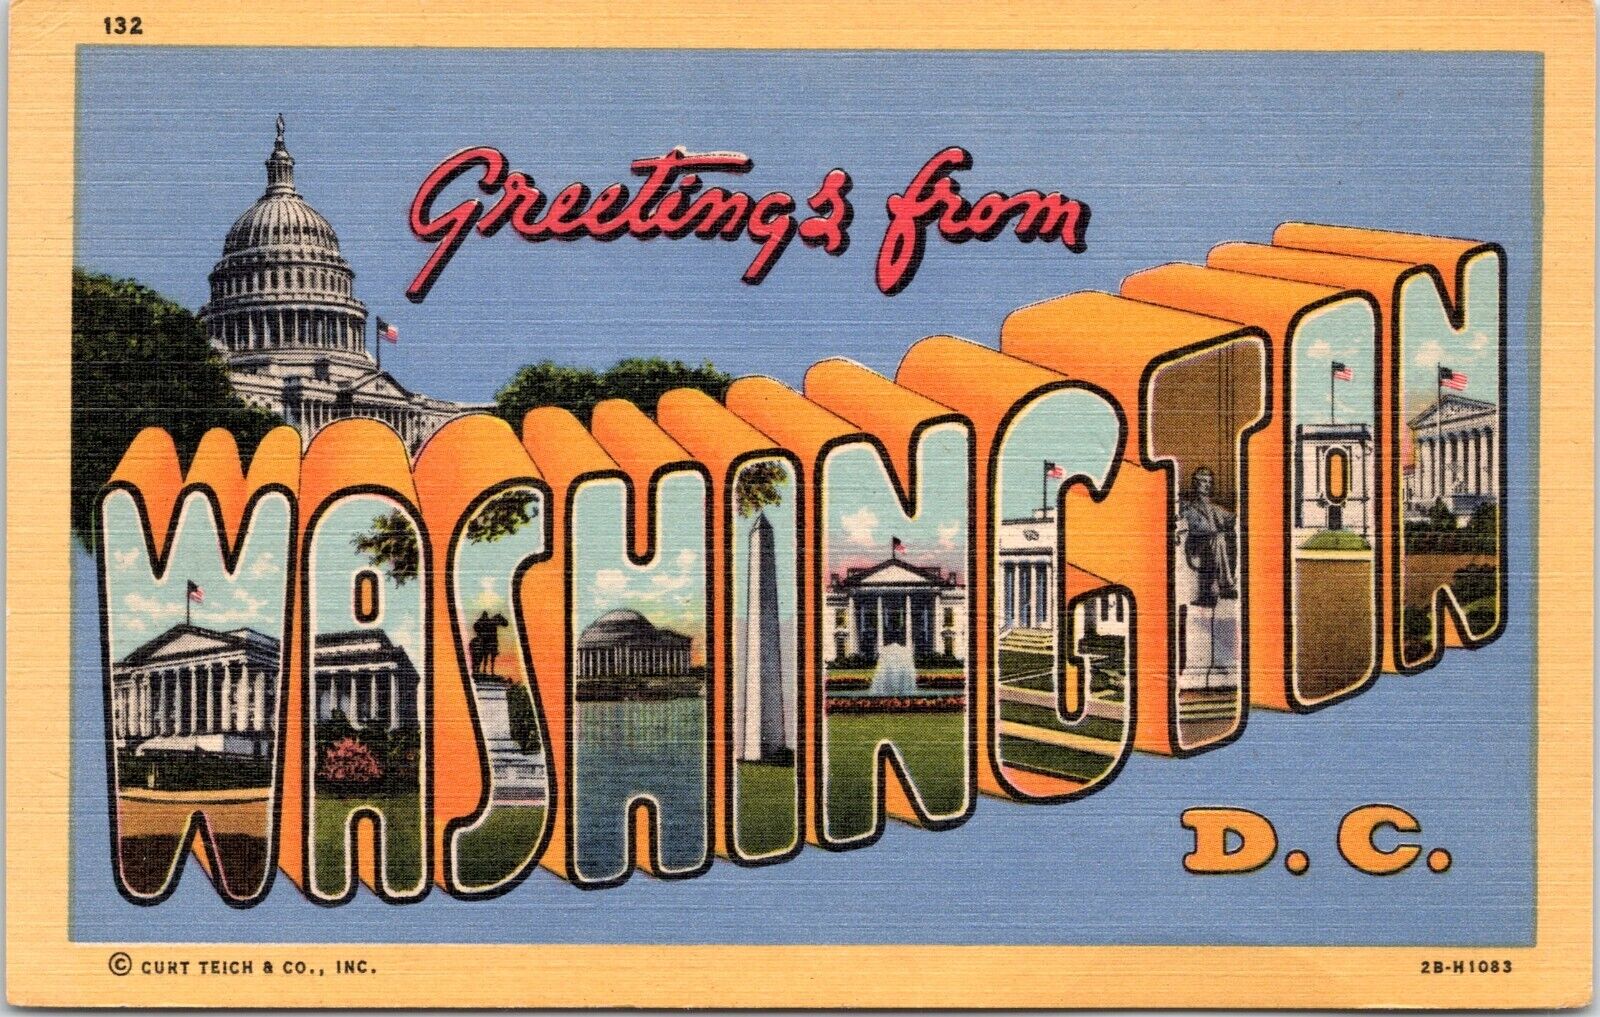 Large Letter Greetings from Washington DC - 1942 Linen Postcard- Curt Teich